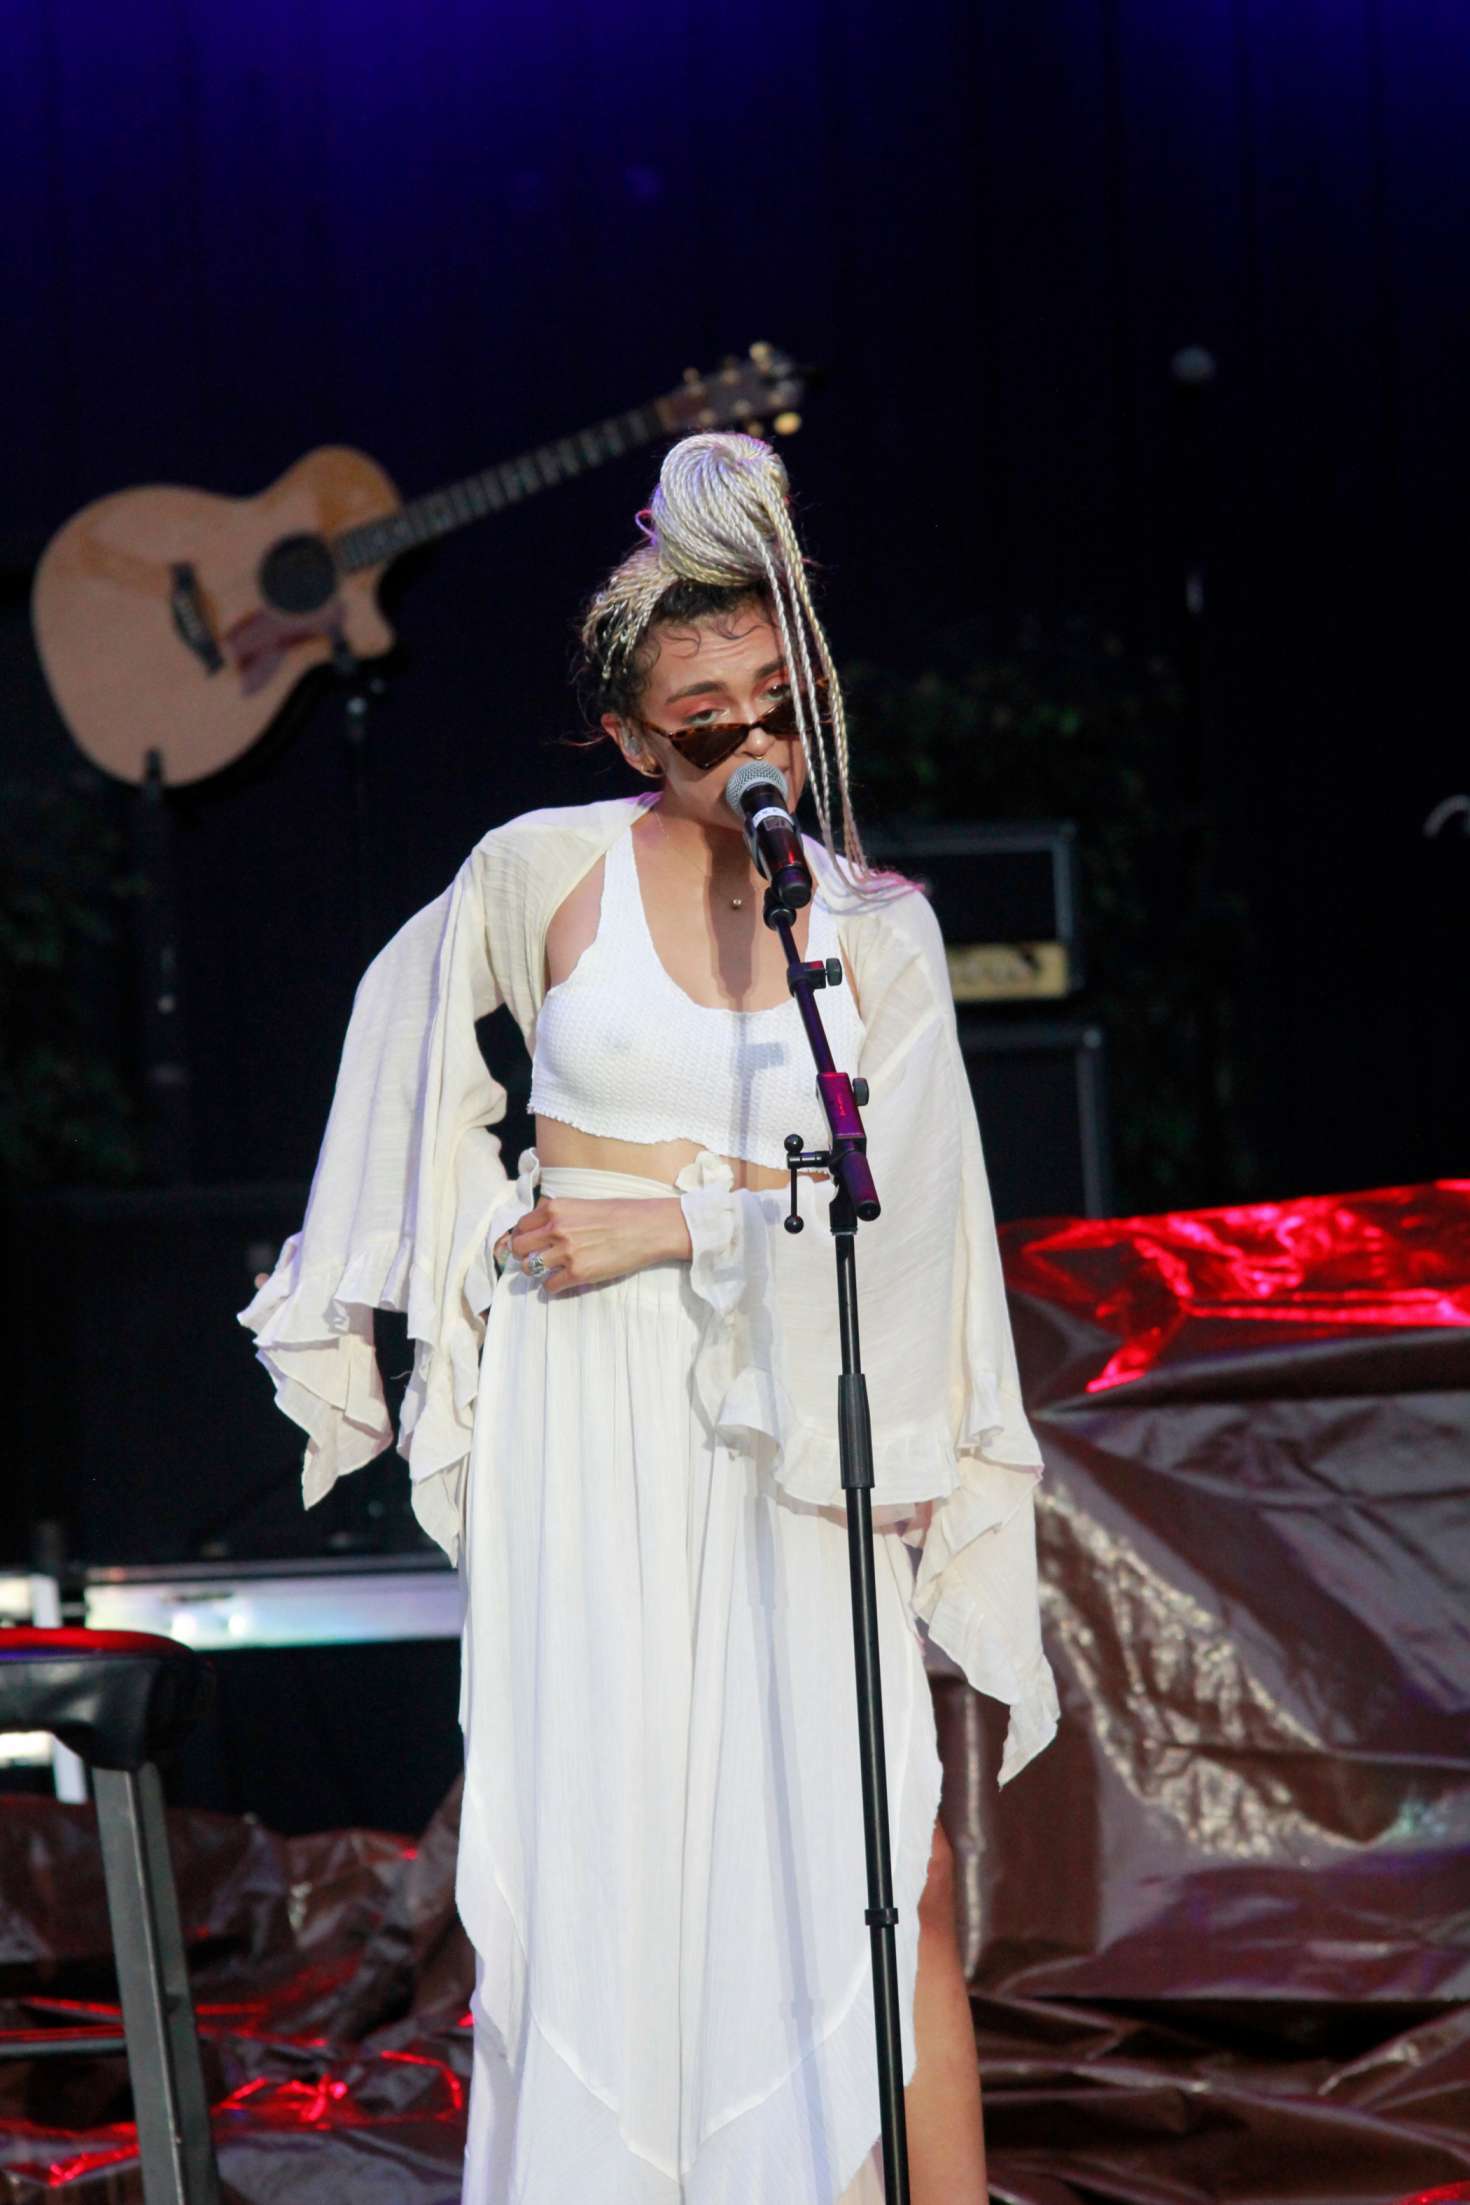 QUIN â€“ Performs live at the Dell Music Center in Philadelphia